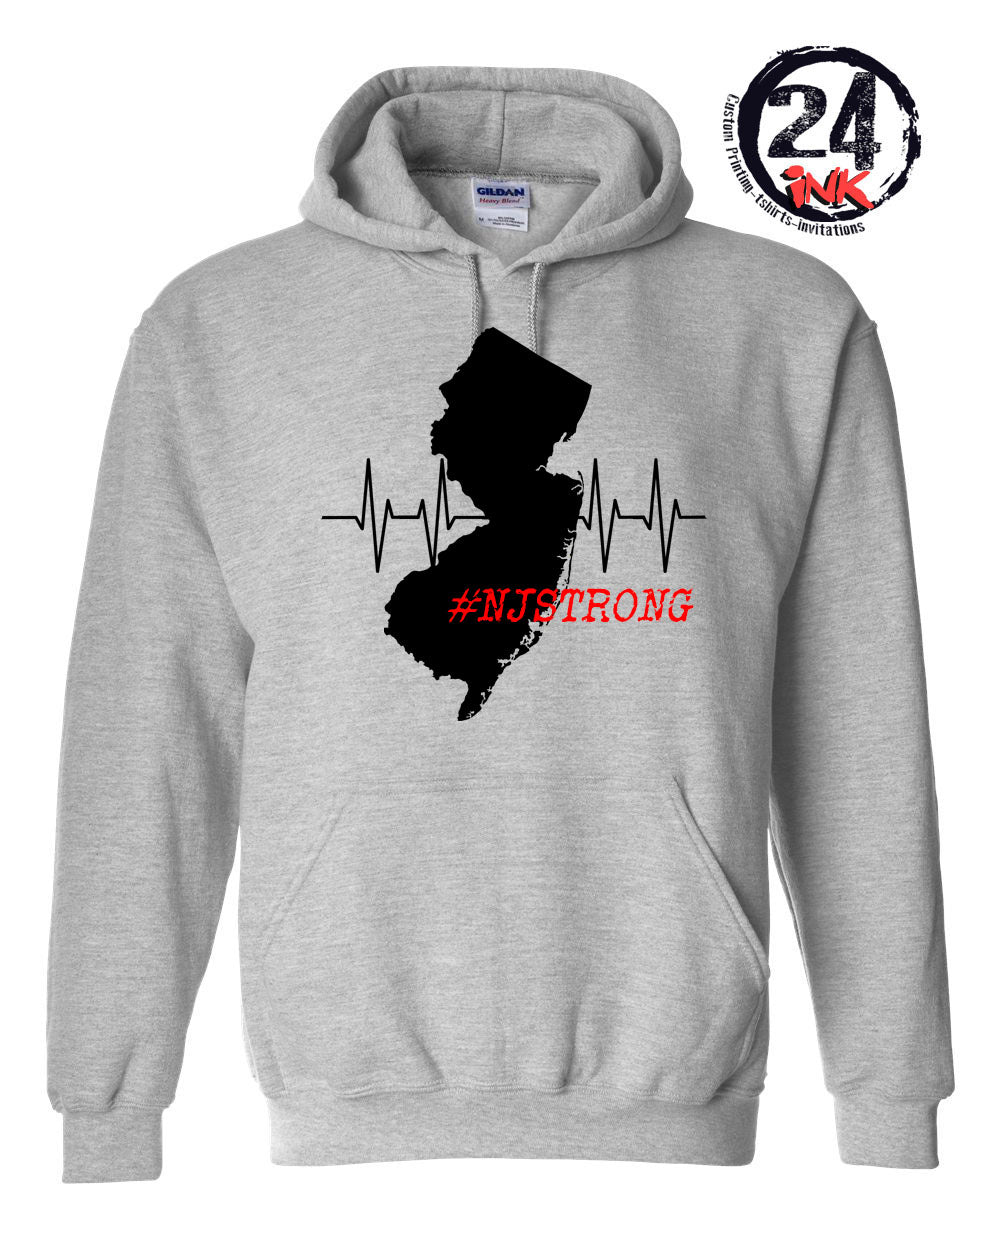 (your state) Strong Sweatshirt